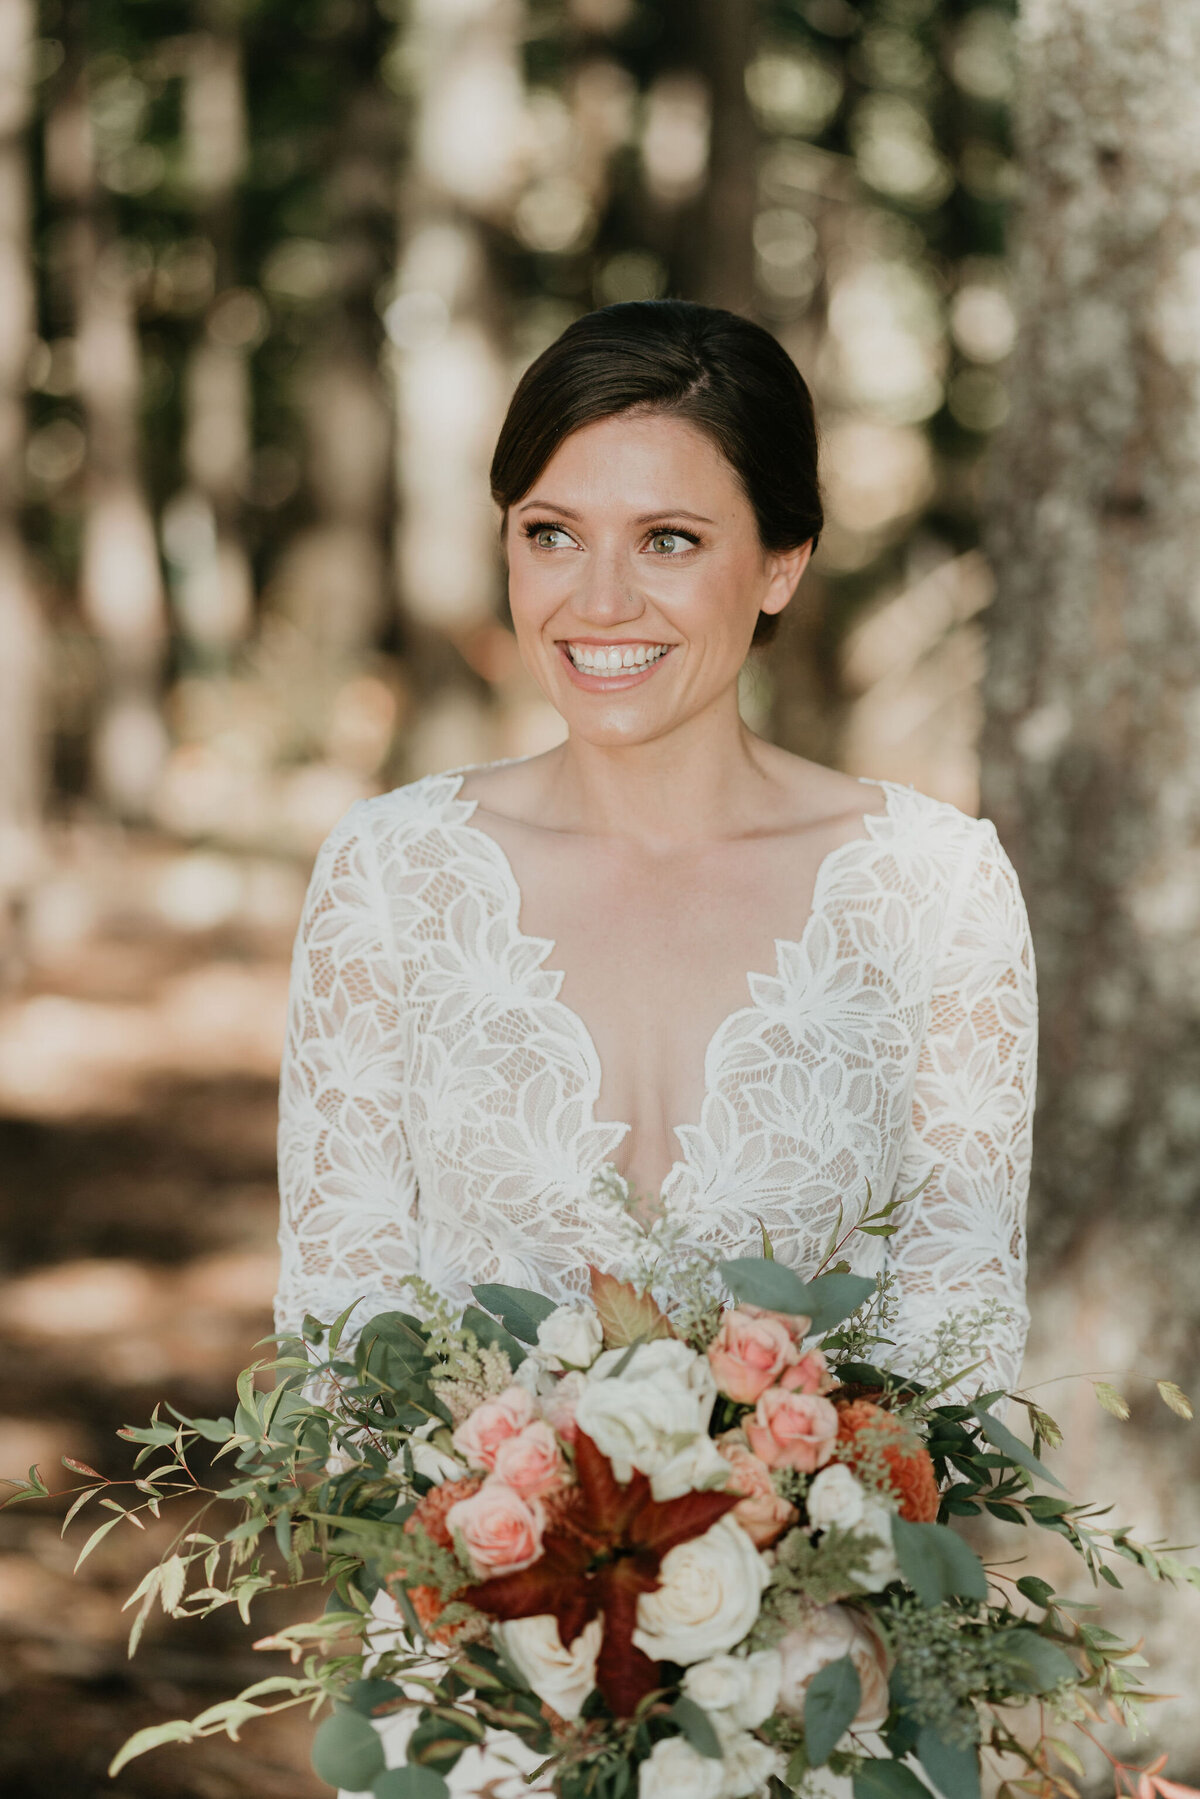 Bride holding bouquet and smiling